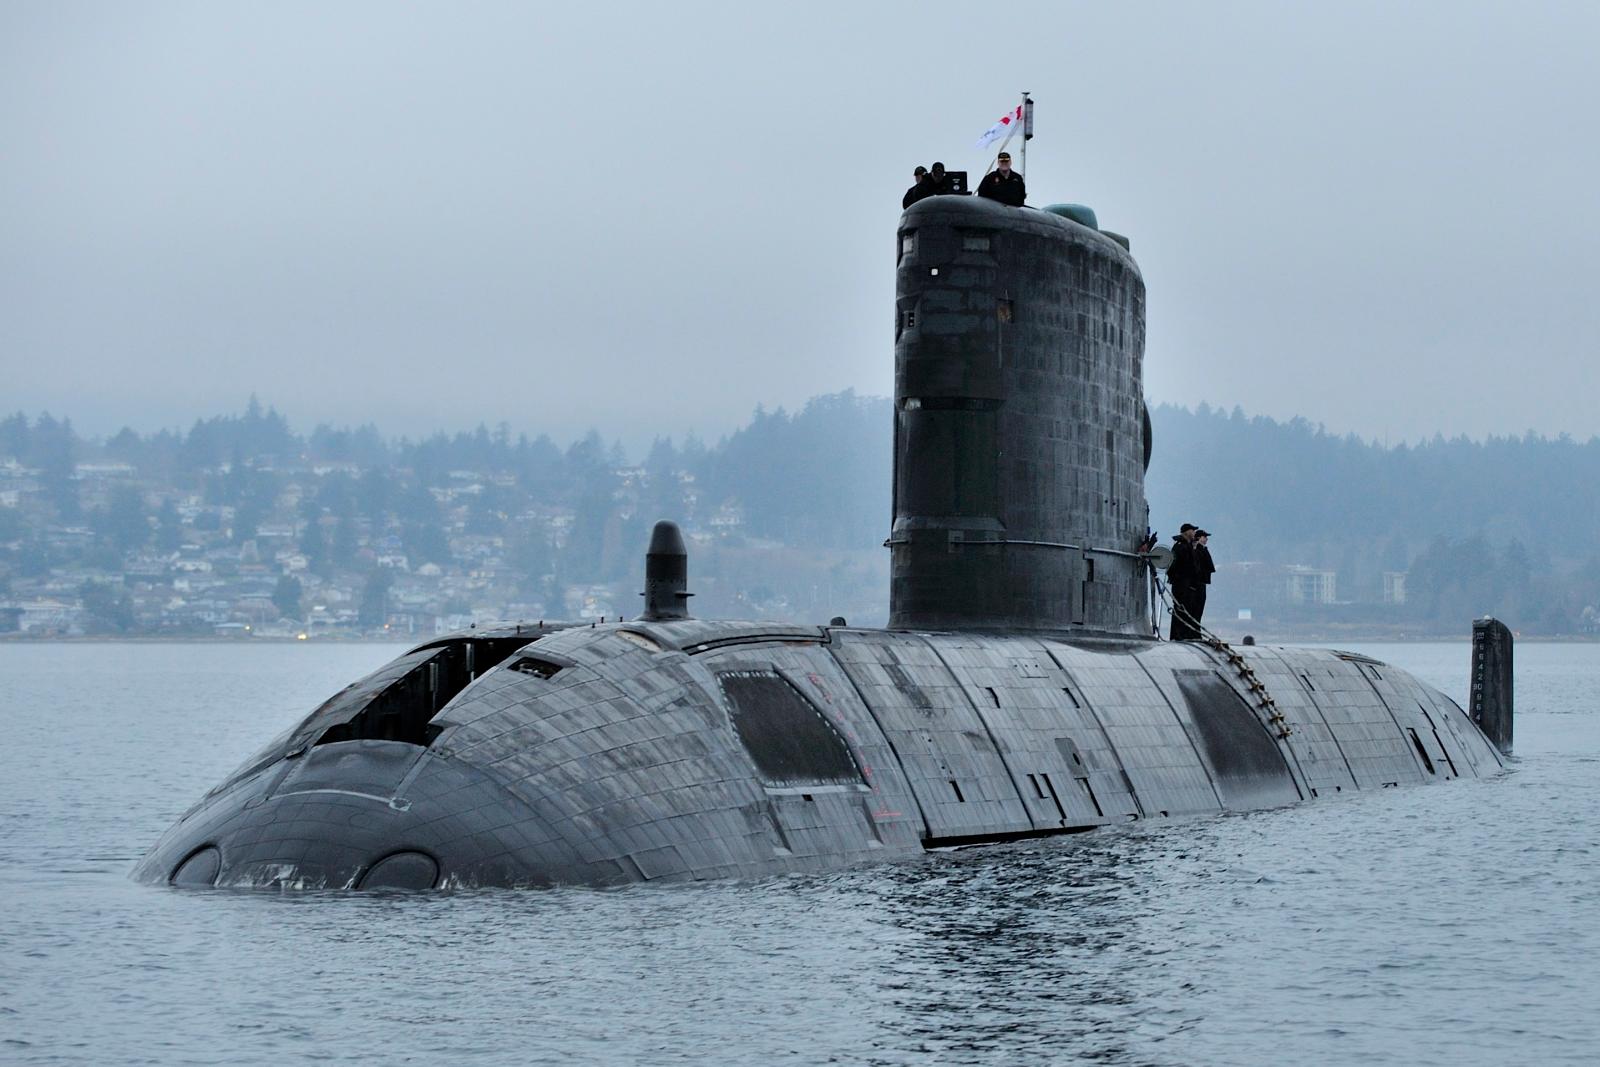 The quest for the unconventional – conventional submarine